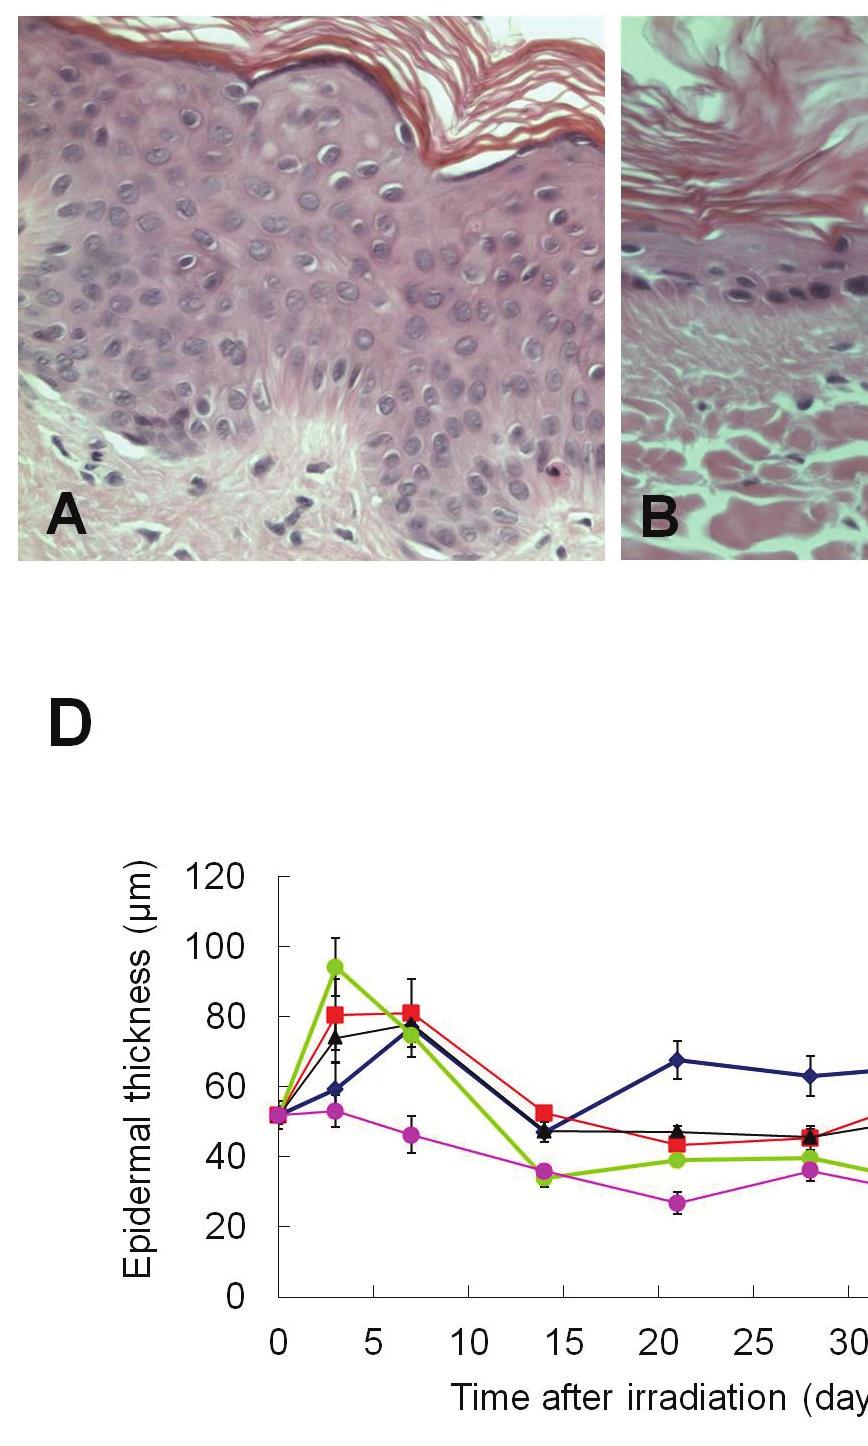 Fig. 3. Histological changes in mini-pig skin following gamma irradiation (20 70 Gy).